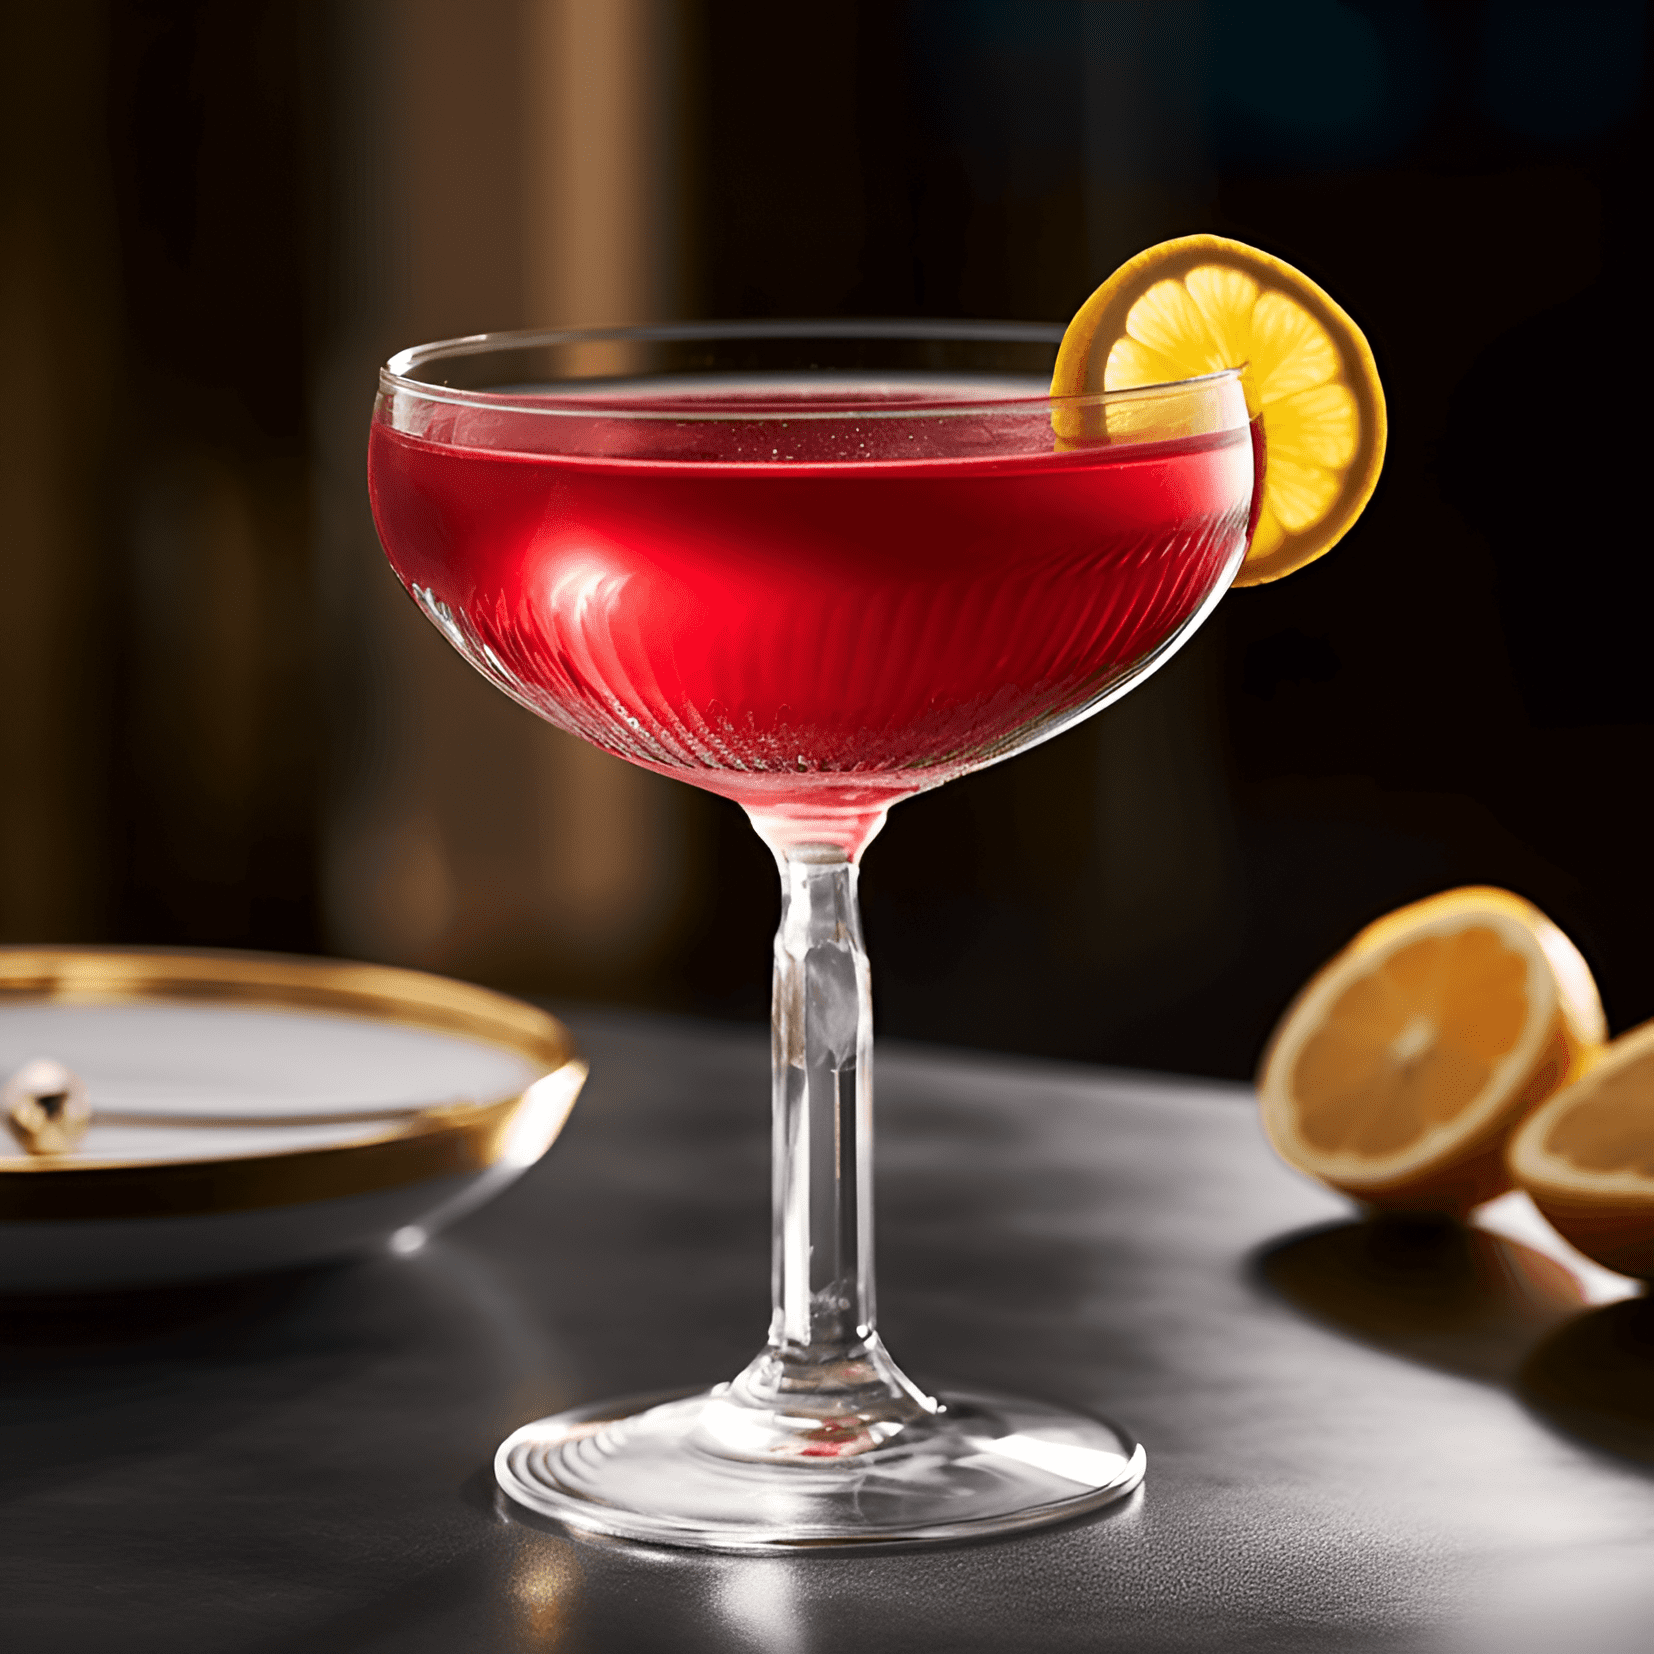 Dubonnet Cocktail Recipe - The Dubonnet Cocktail offers a delightful balance of flavors, with a slightly bitter, herbal taste from the Dubonnet, complemented by the sweetness of the gin and the zesty notes of the lemon twist. It's a smooth, refreshing, and complex cocktail that leaves a pleasant, lingering aftertaste.